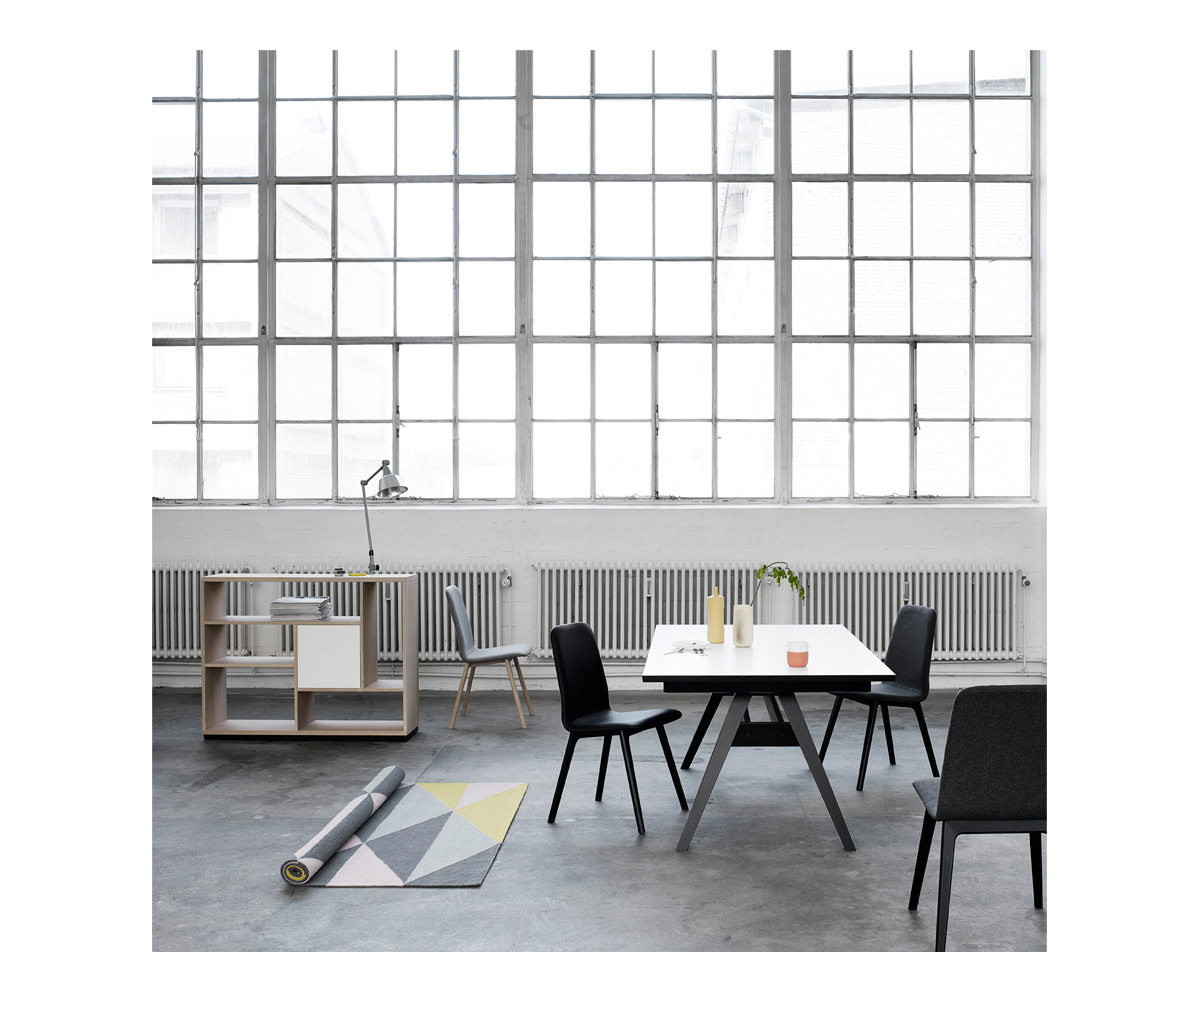 Extendable Dining Table #11